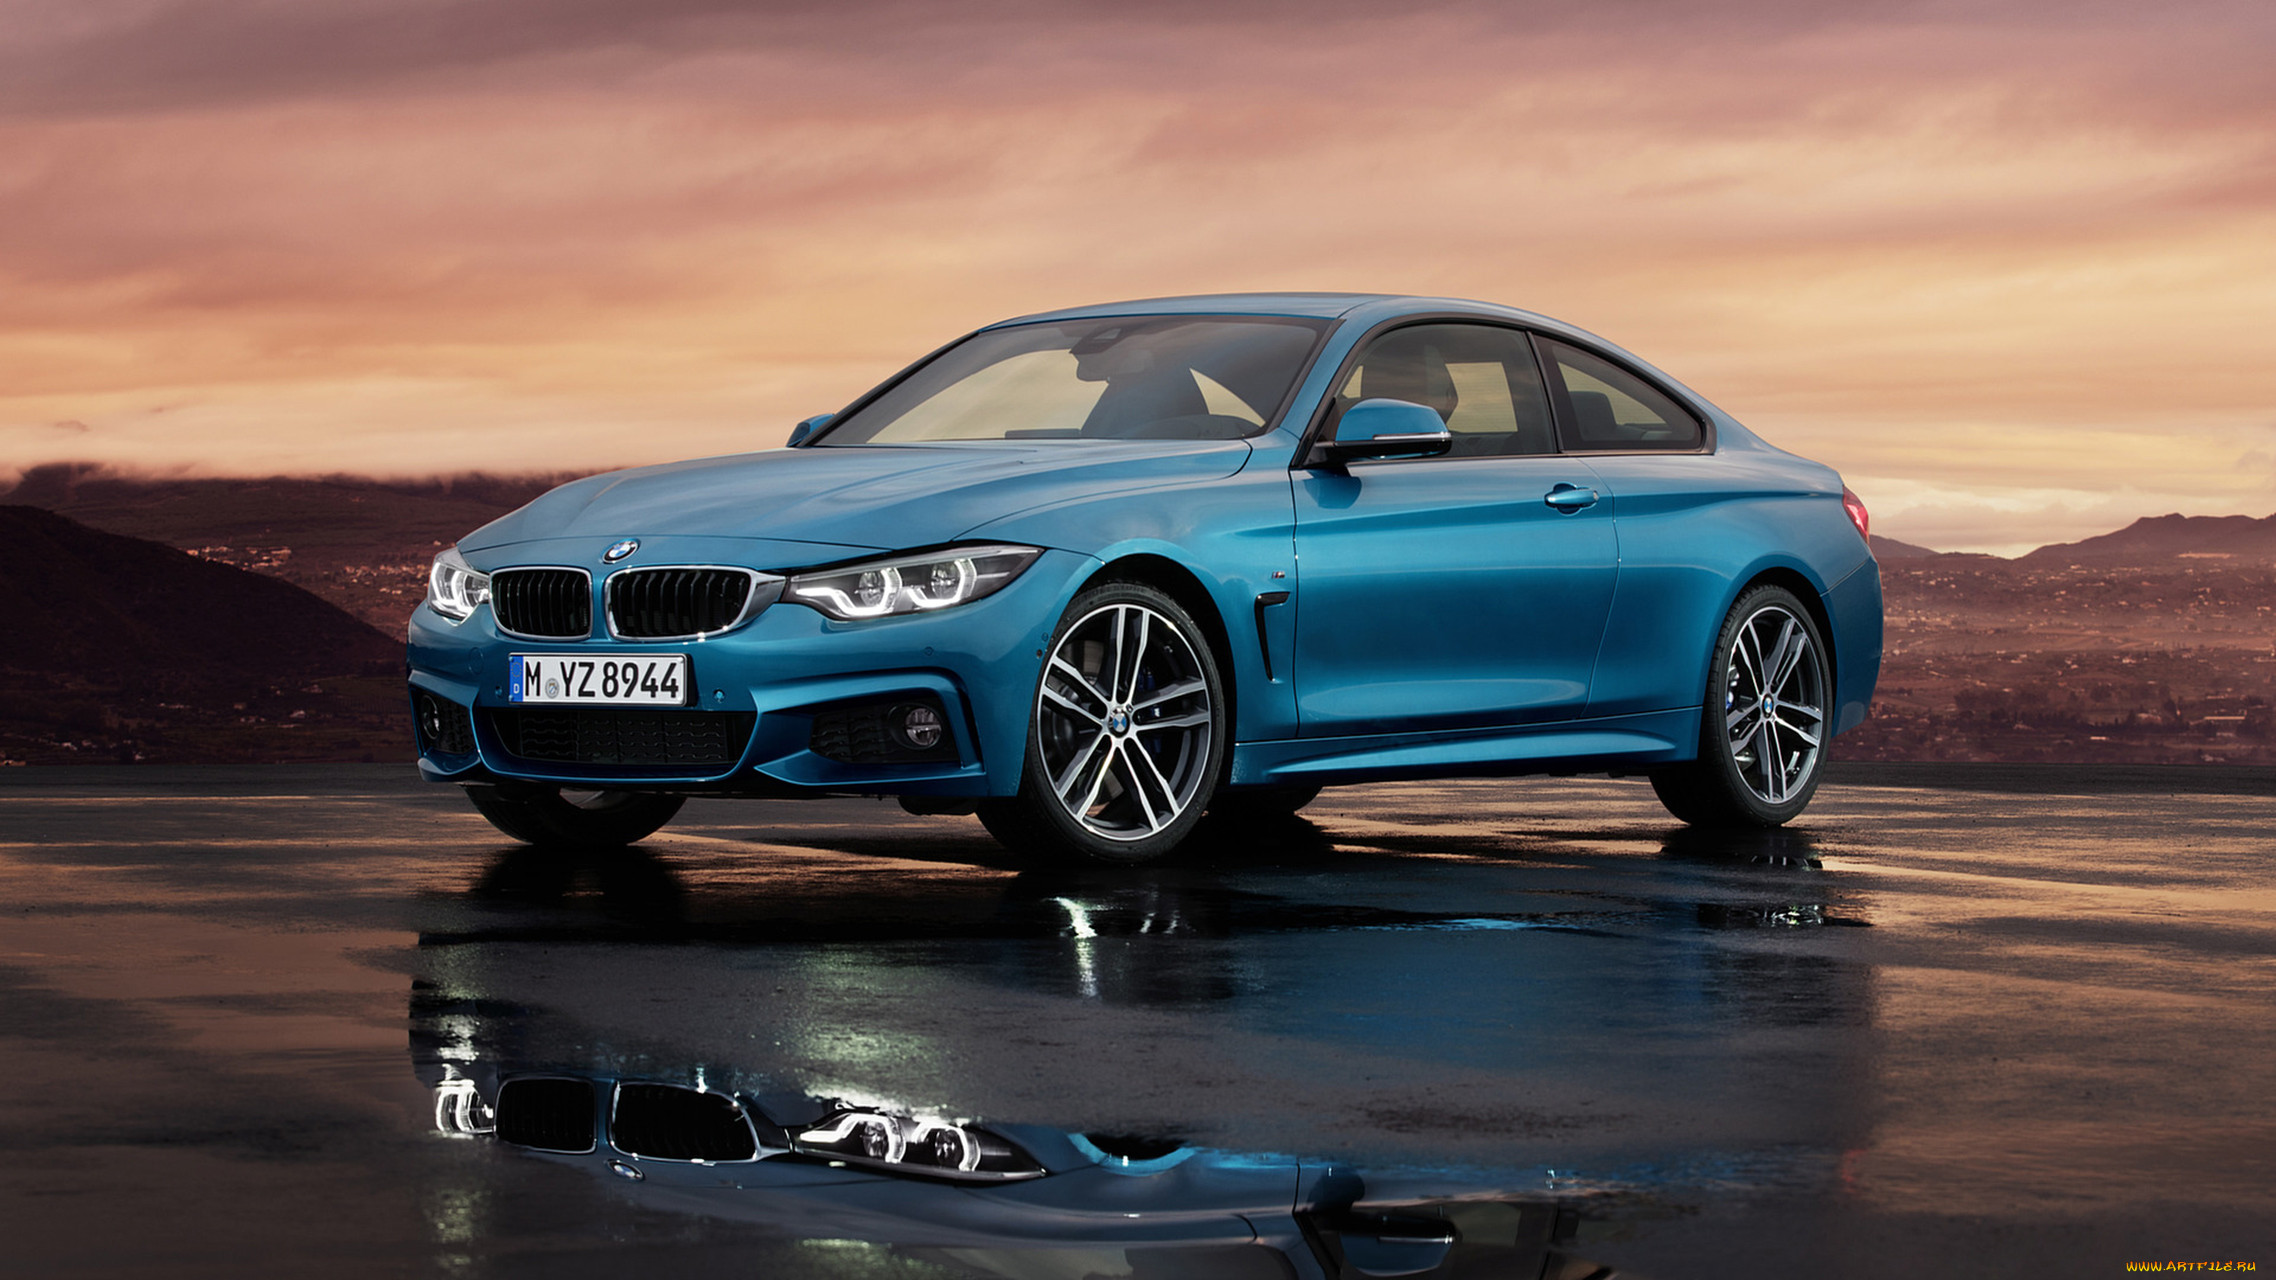 bmw 4 series coupe m sport 2018, , bmw, coupe, sport, 2018, m, series, 4